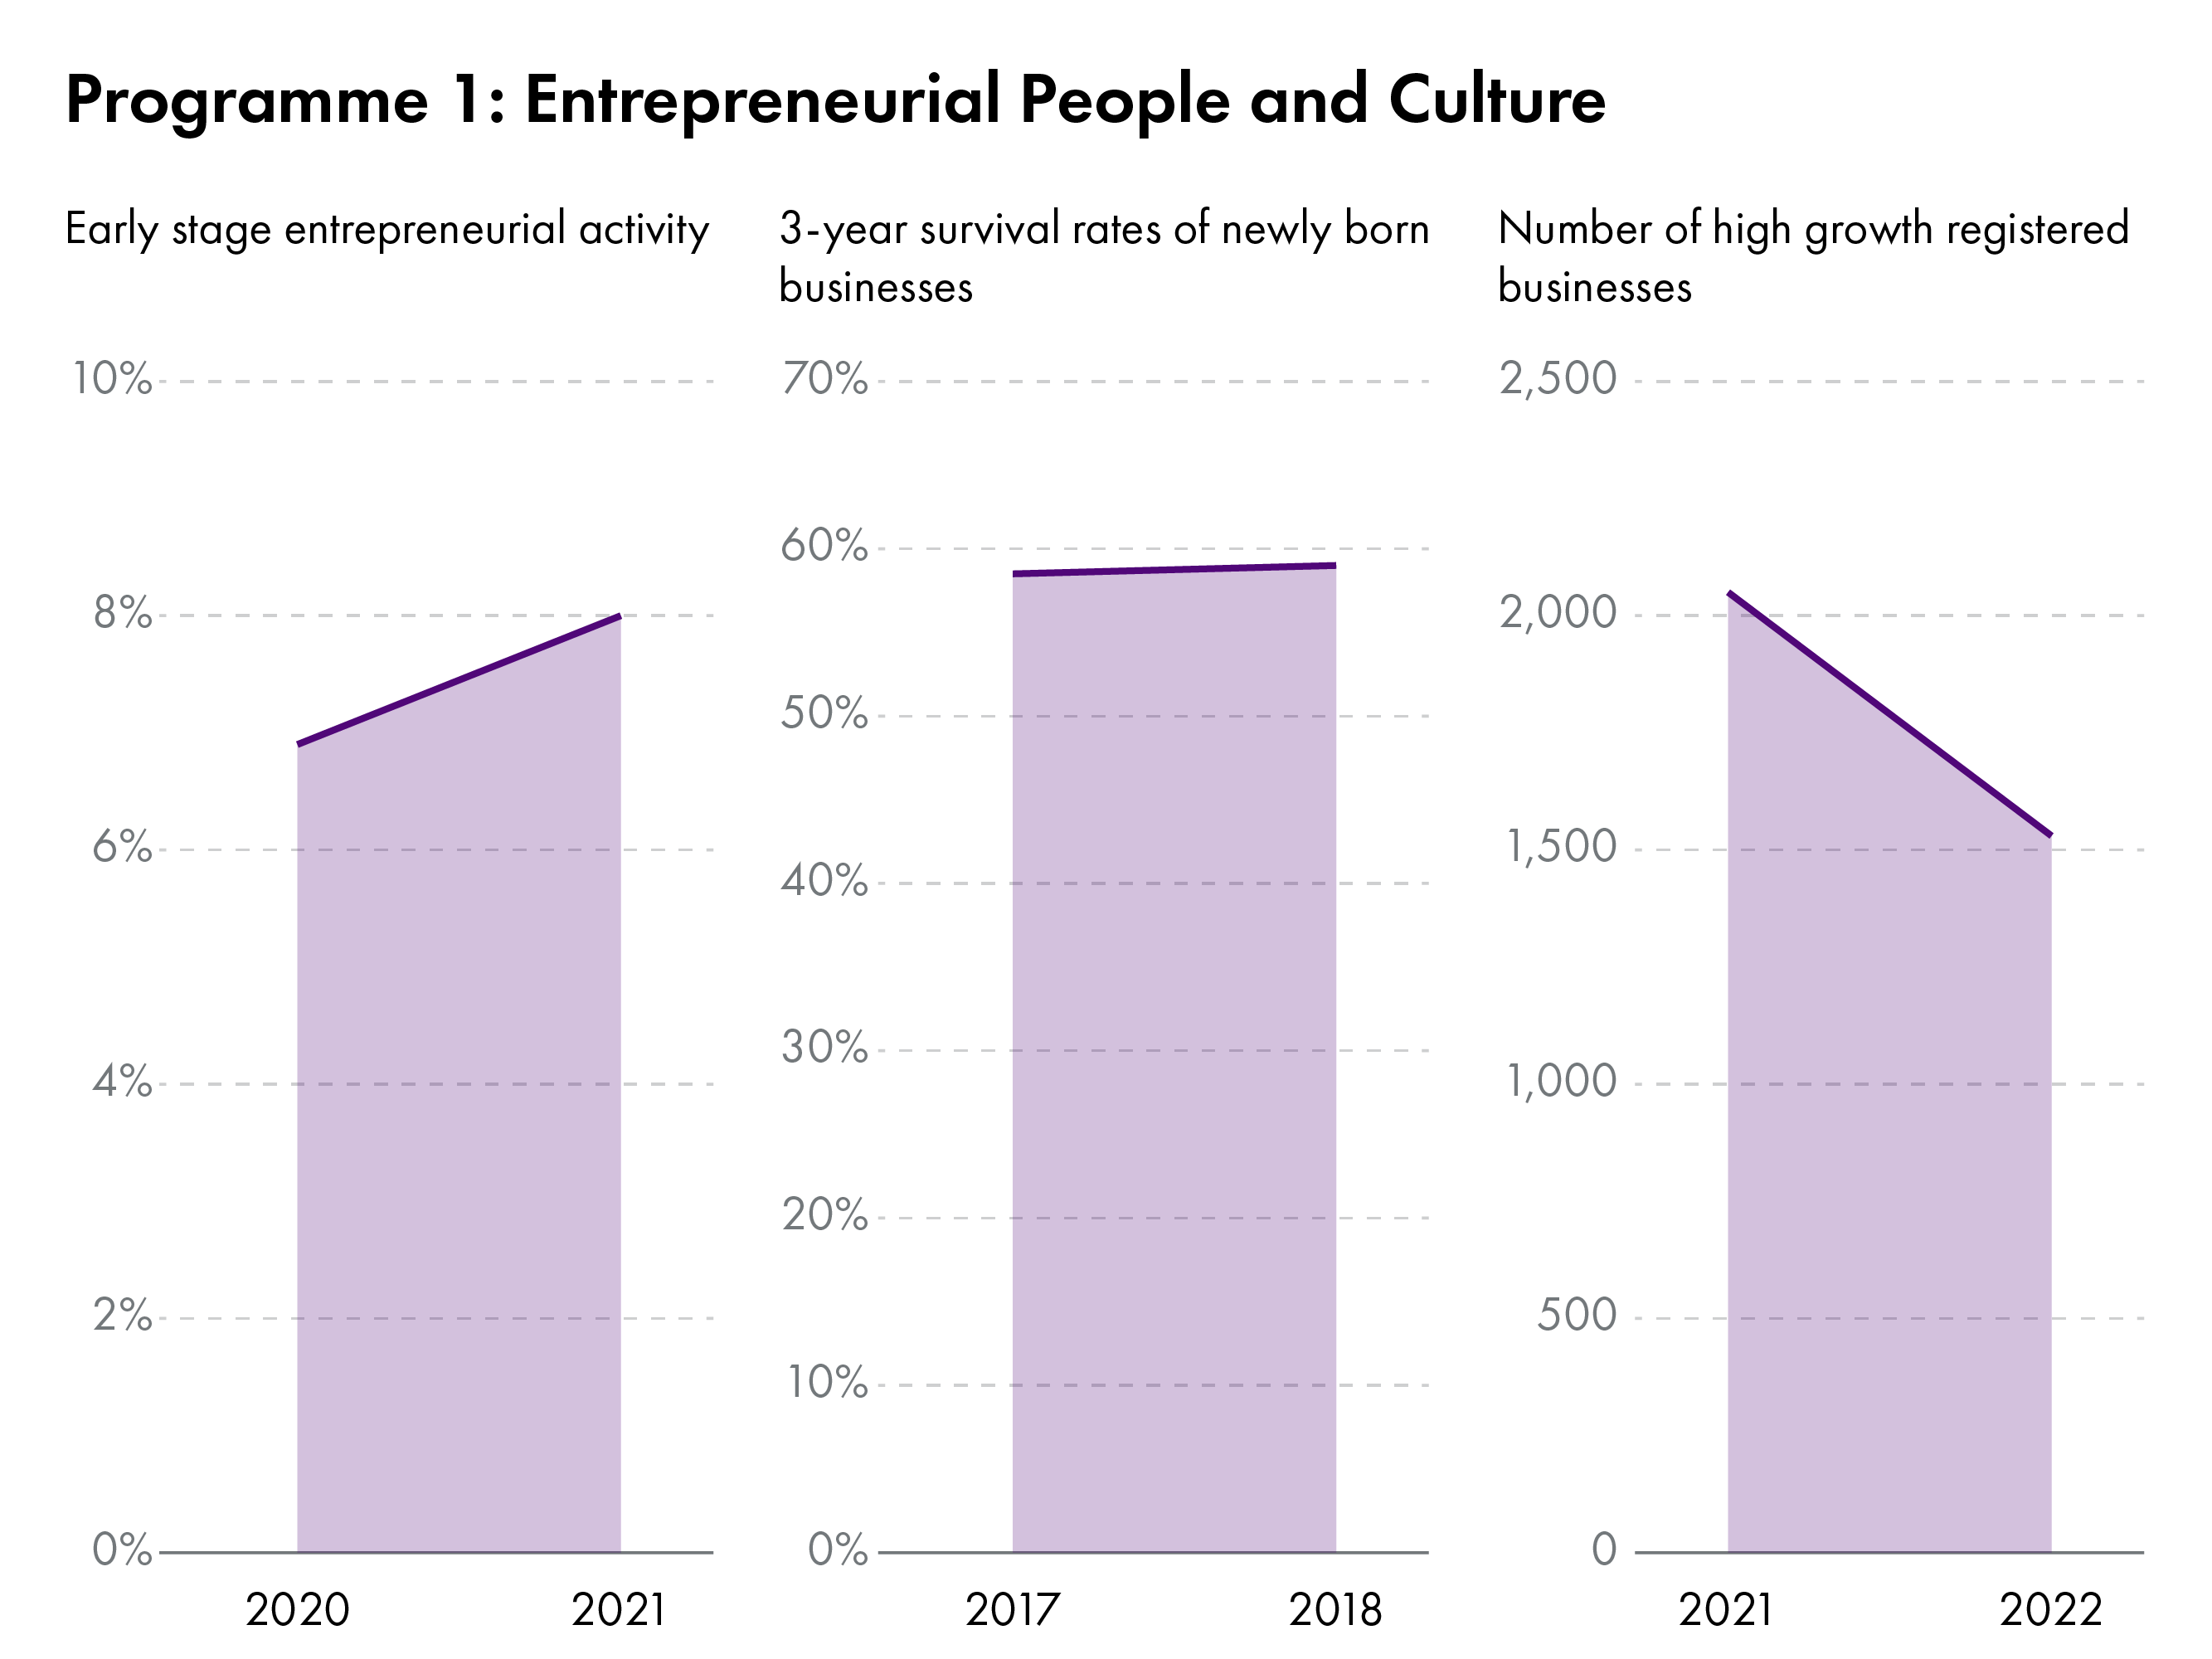 The key indicators for the ‘Entrepreneurial People and Culture’ programme are early stage entrepreneurial activity, the three year survival rate of new businesses, and the number of registered high growth businesses. These data are mostly the baseline setting the context at the launch of NSET – the most significant movement is a fall in the number of high growth registered businesses in 2022 although this will have been impacted by the Covid-19 pandemic.